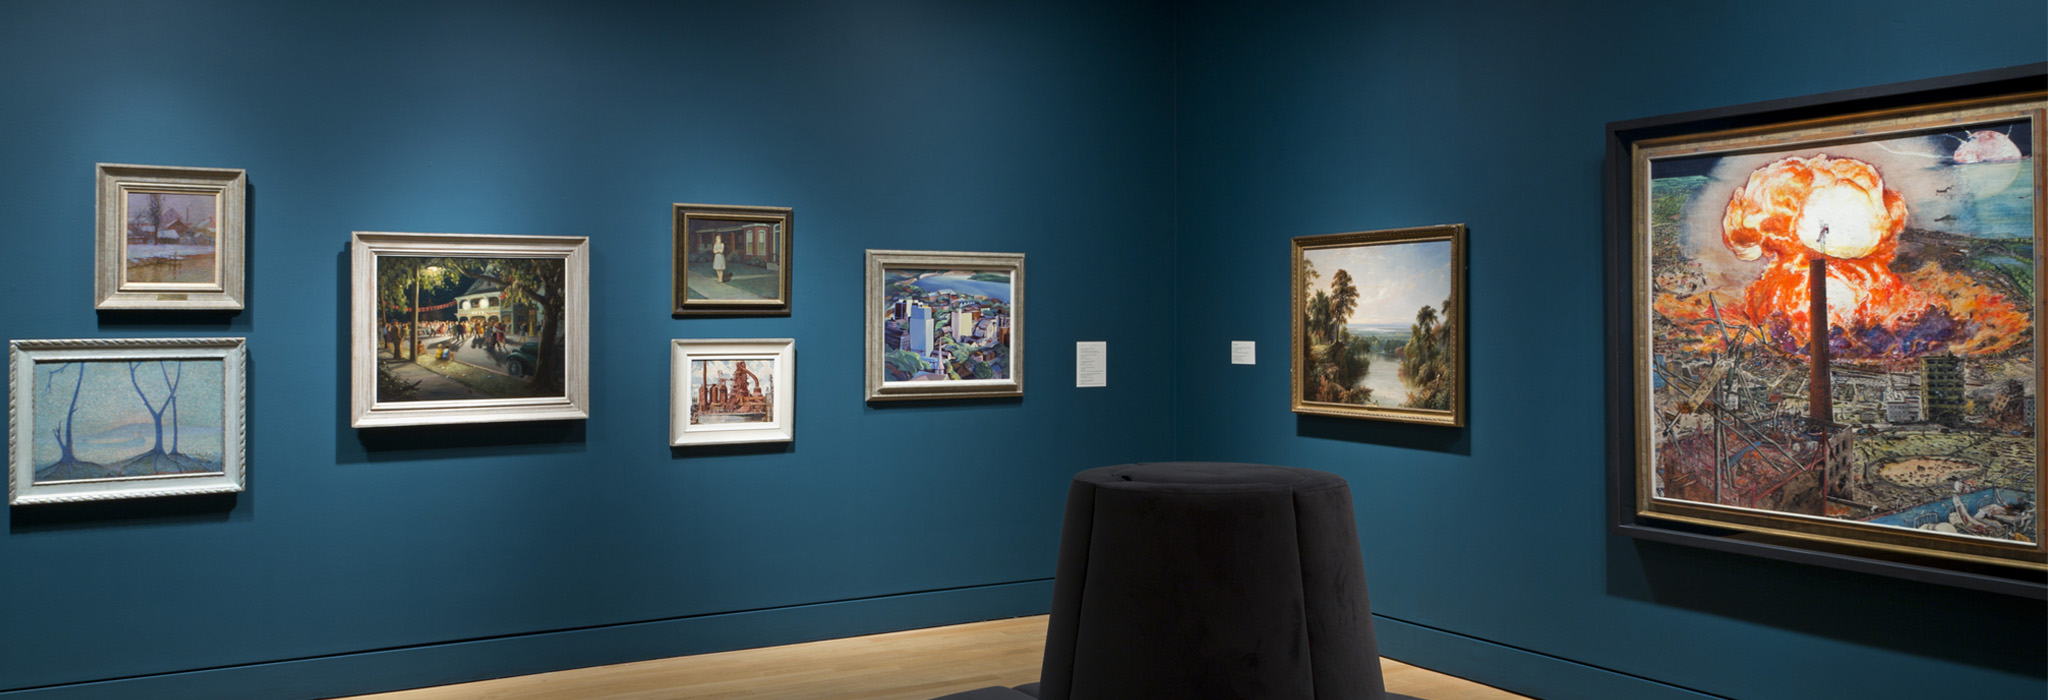 Collections - Art Gallery of Hamilton